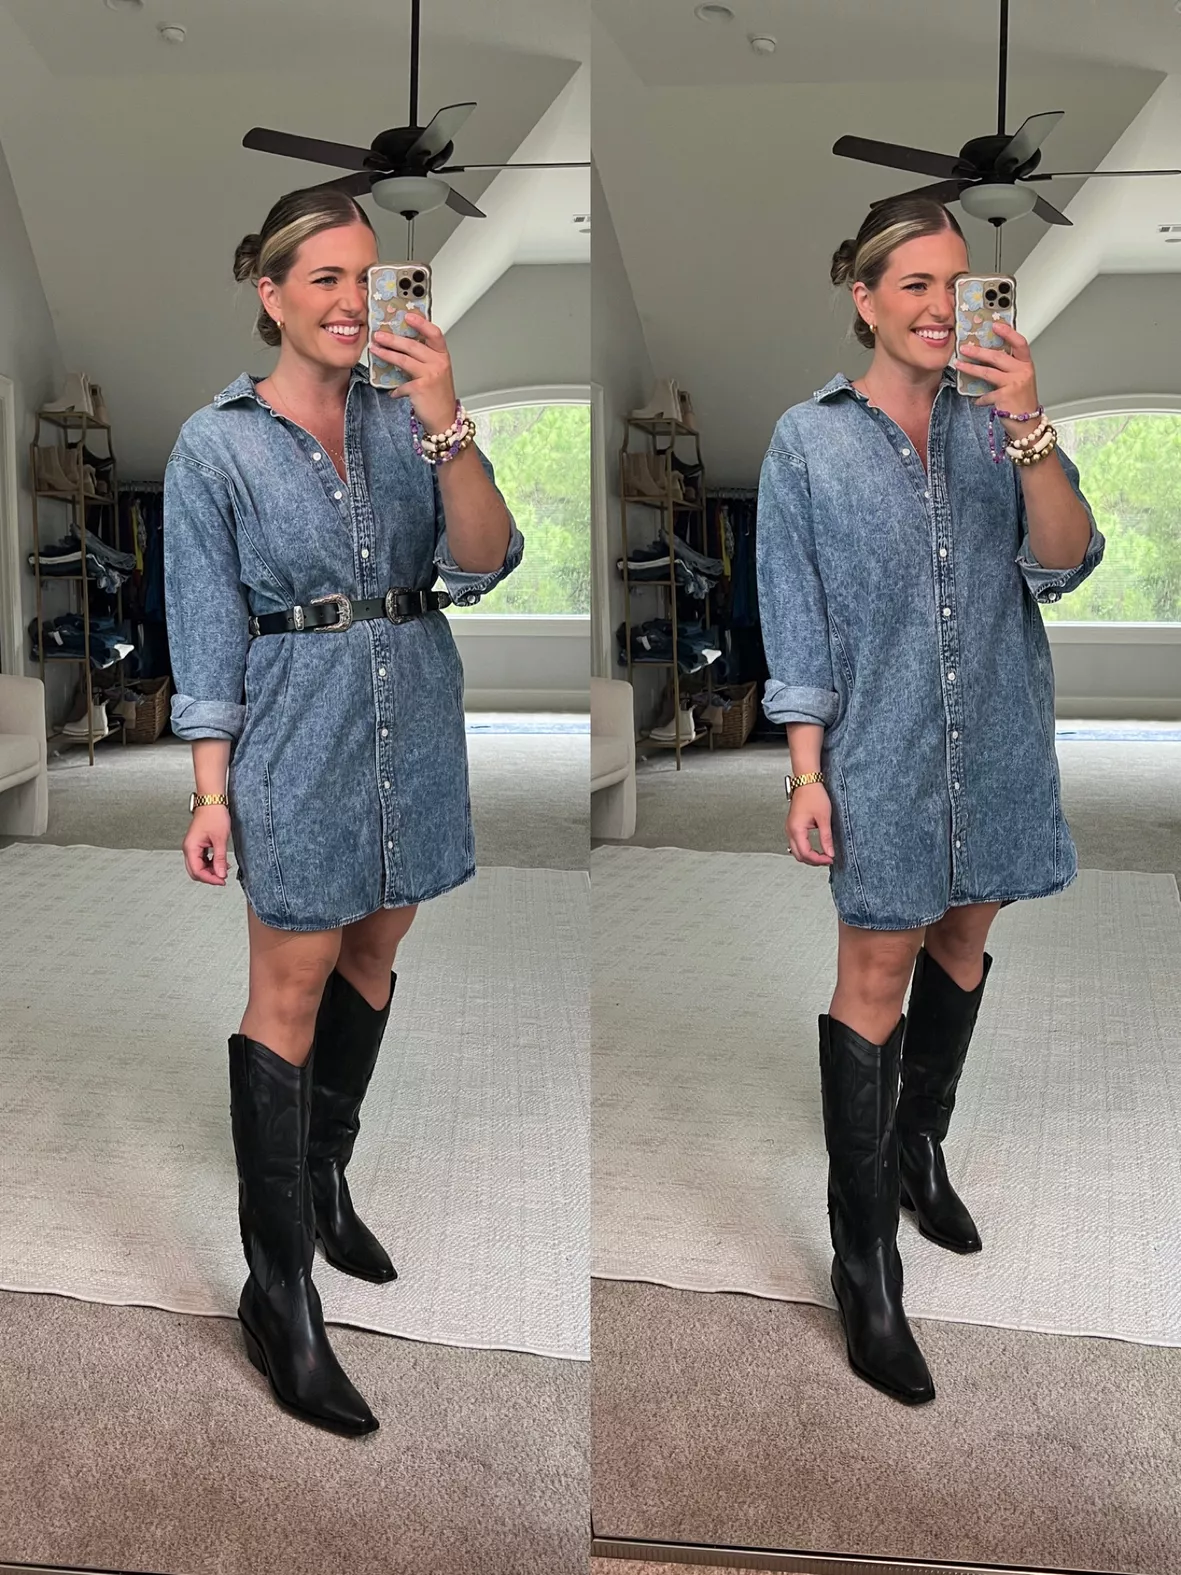 20 Cute Outfits for a Country Concert That All True Fans Will